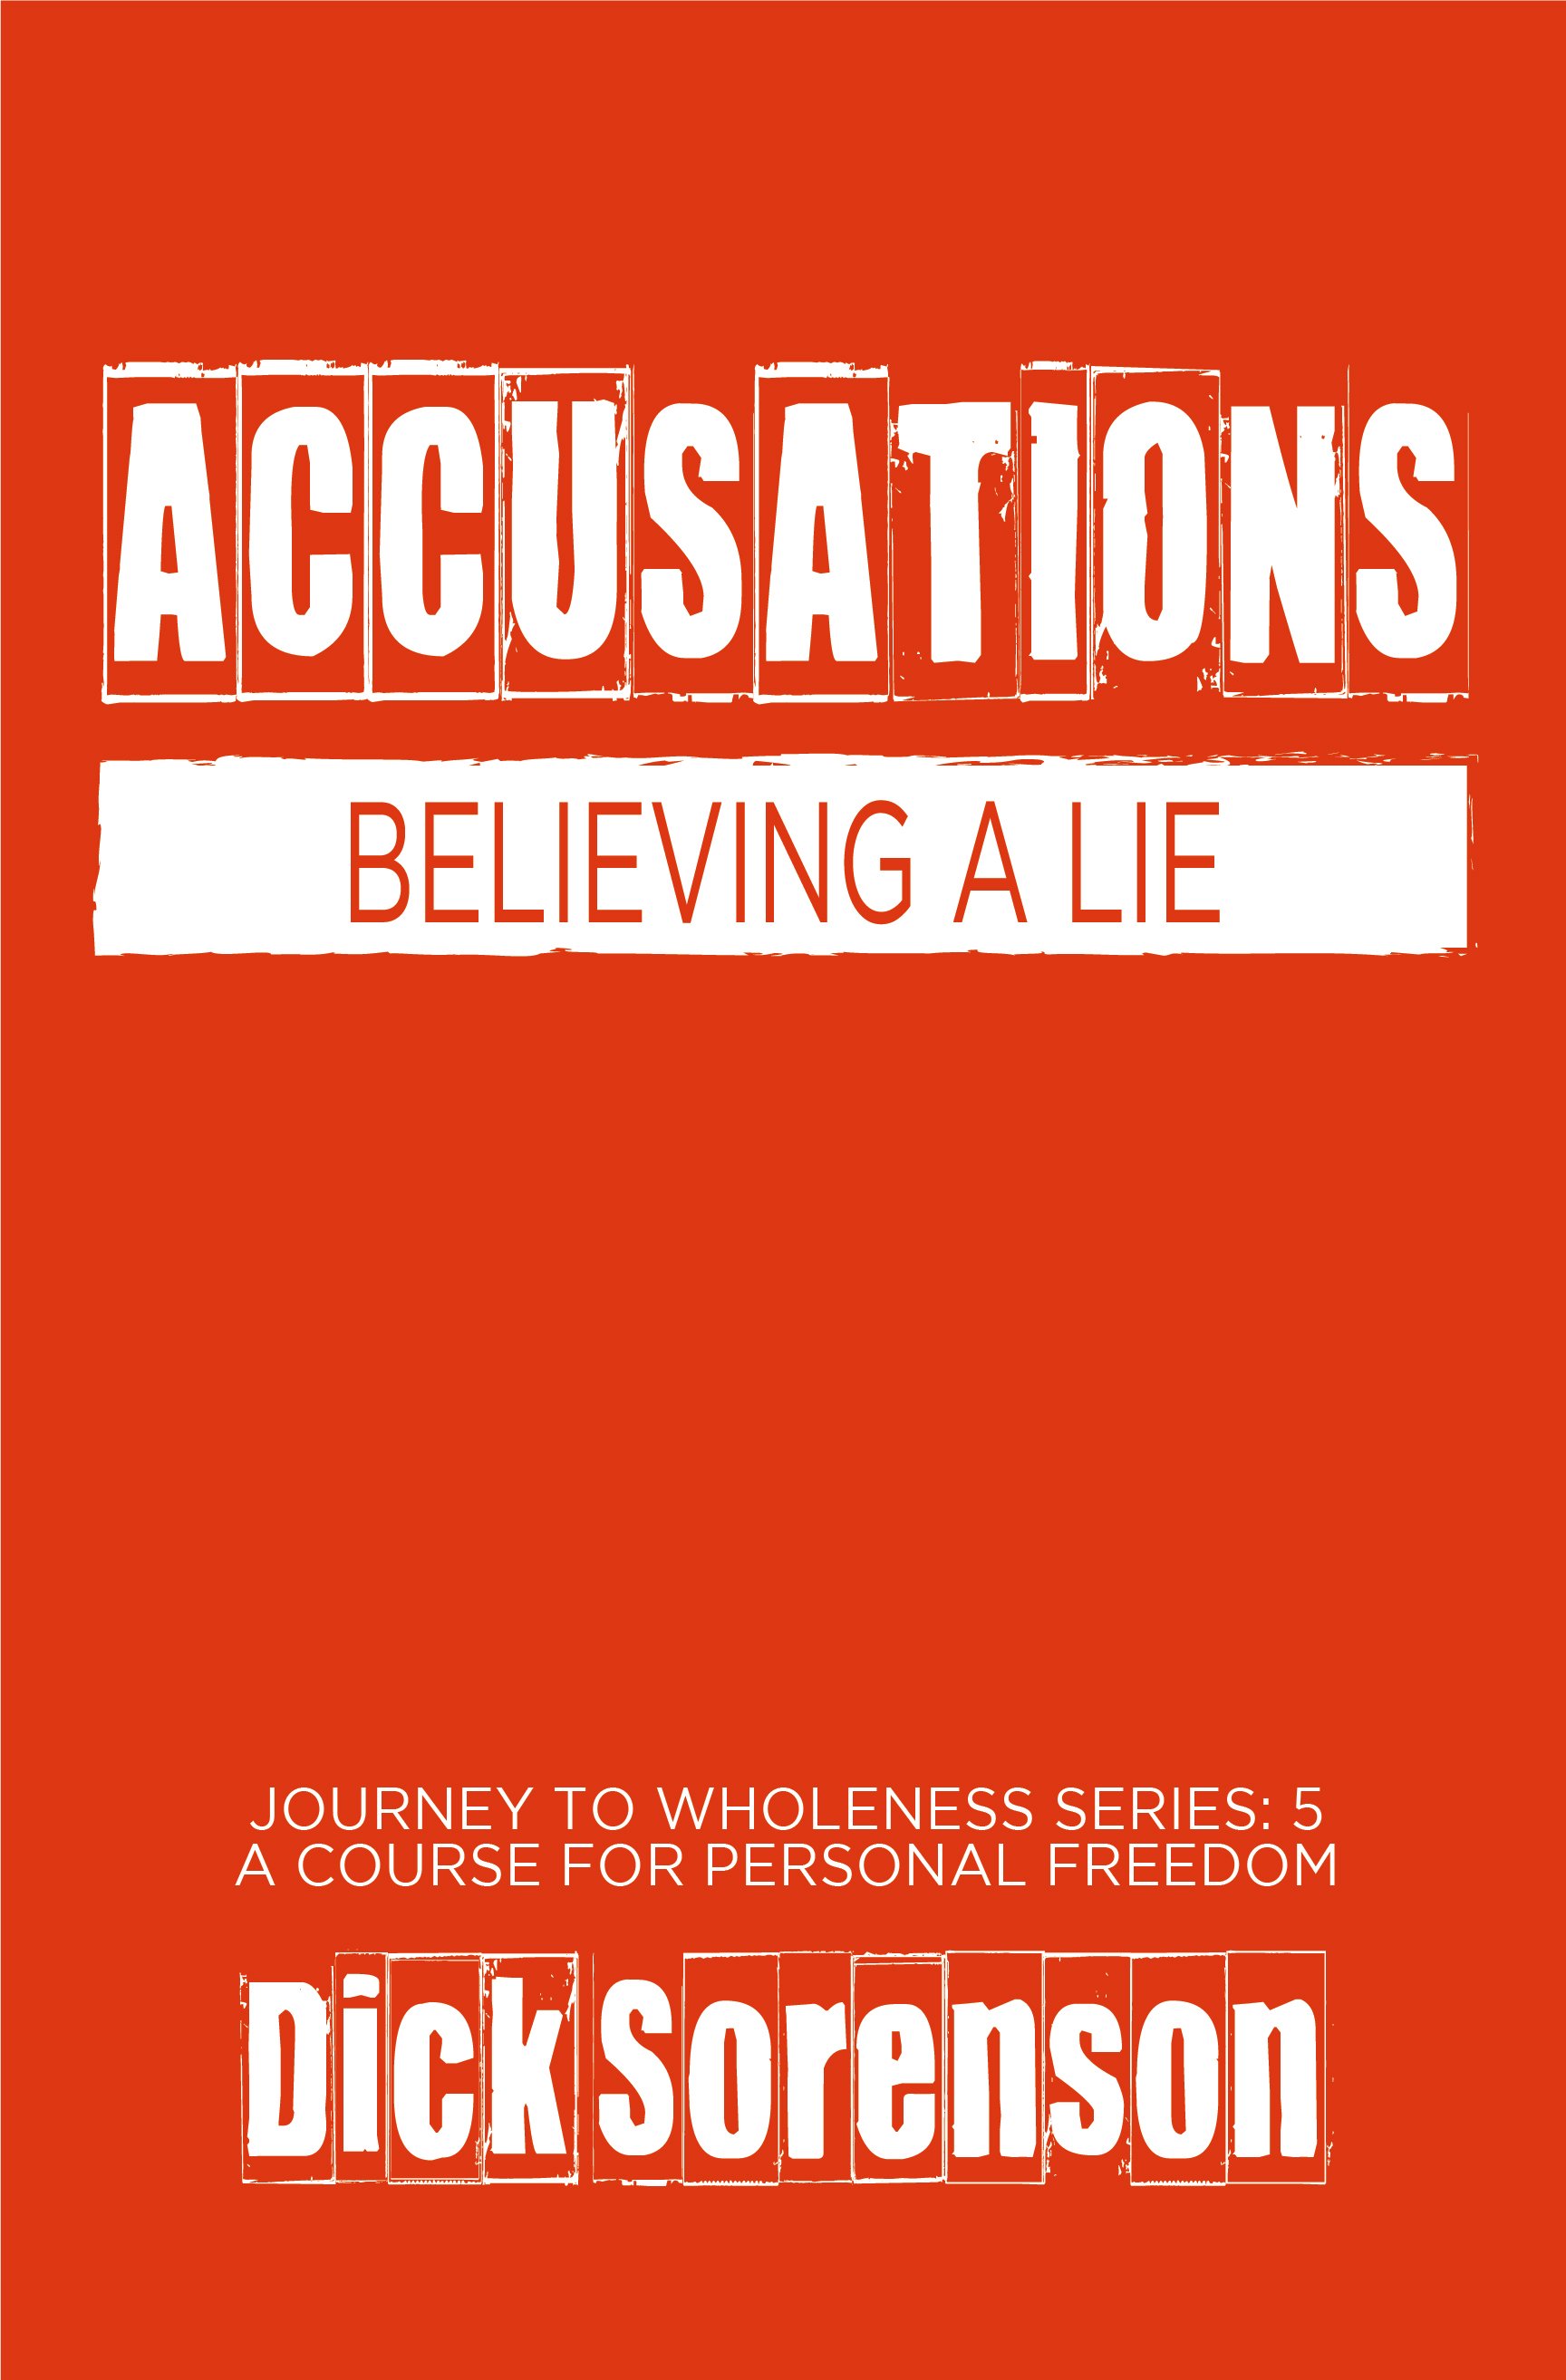 Accusations E-book cover May 2022.jpg